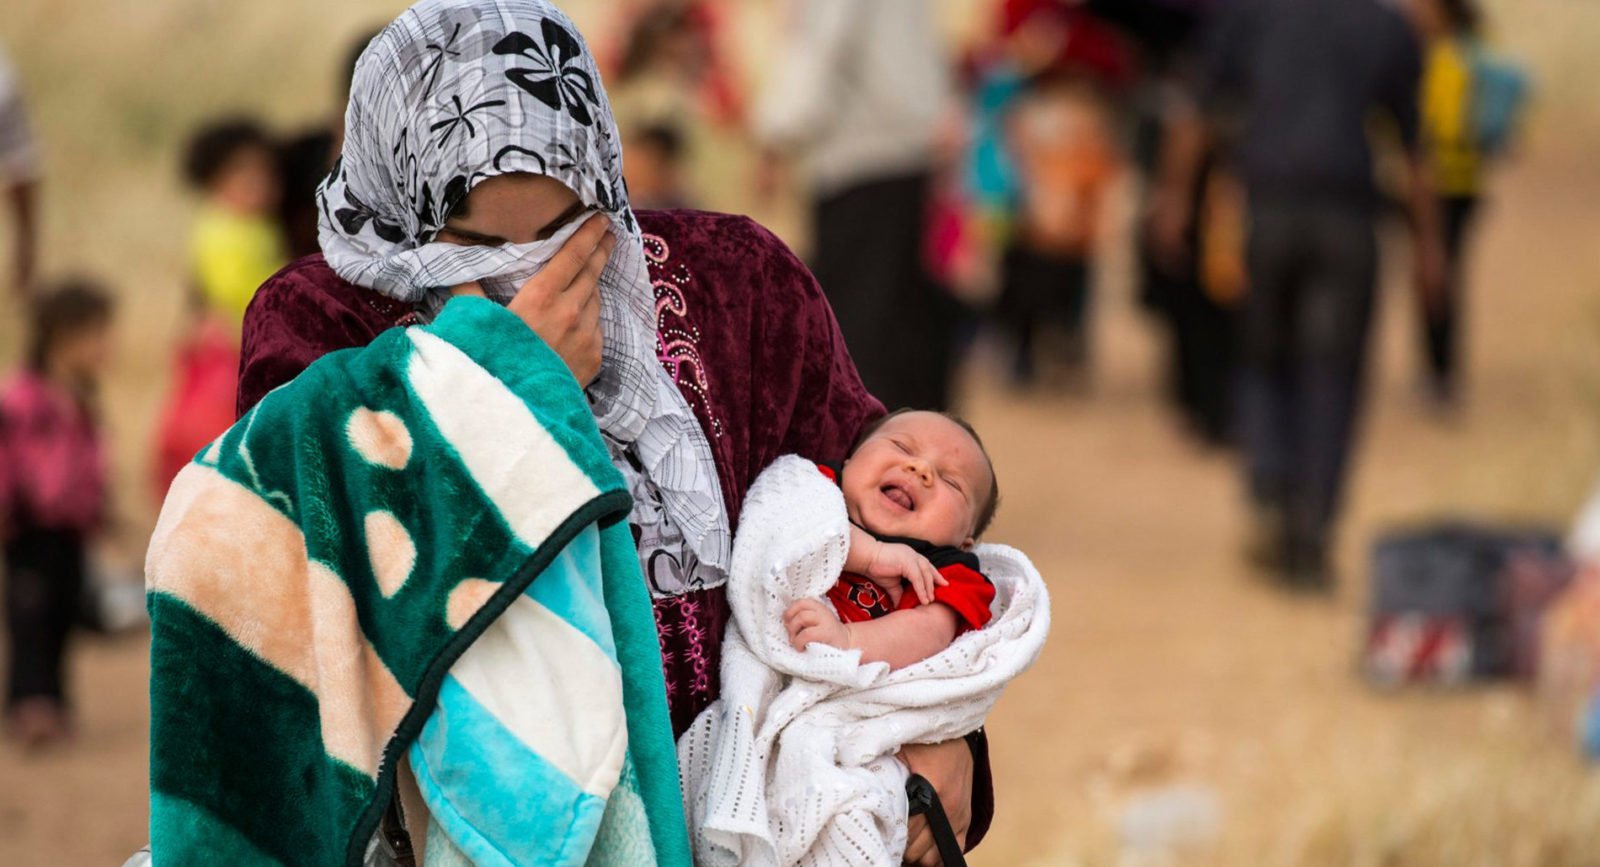 A young mother fleeing Syria with her baby